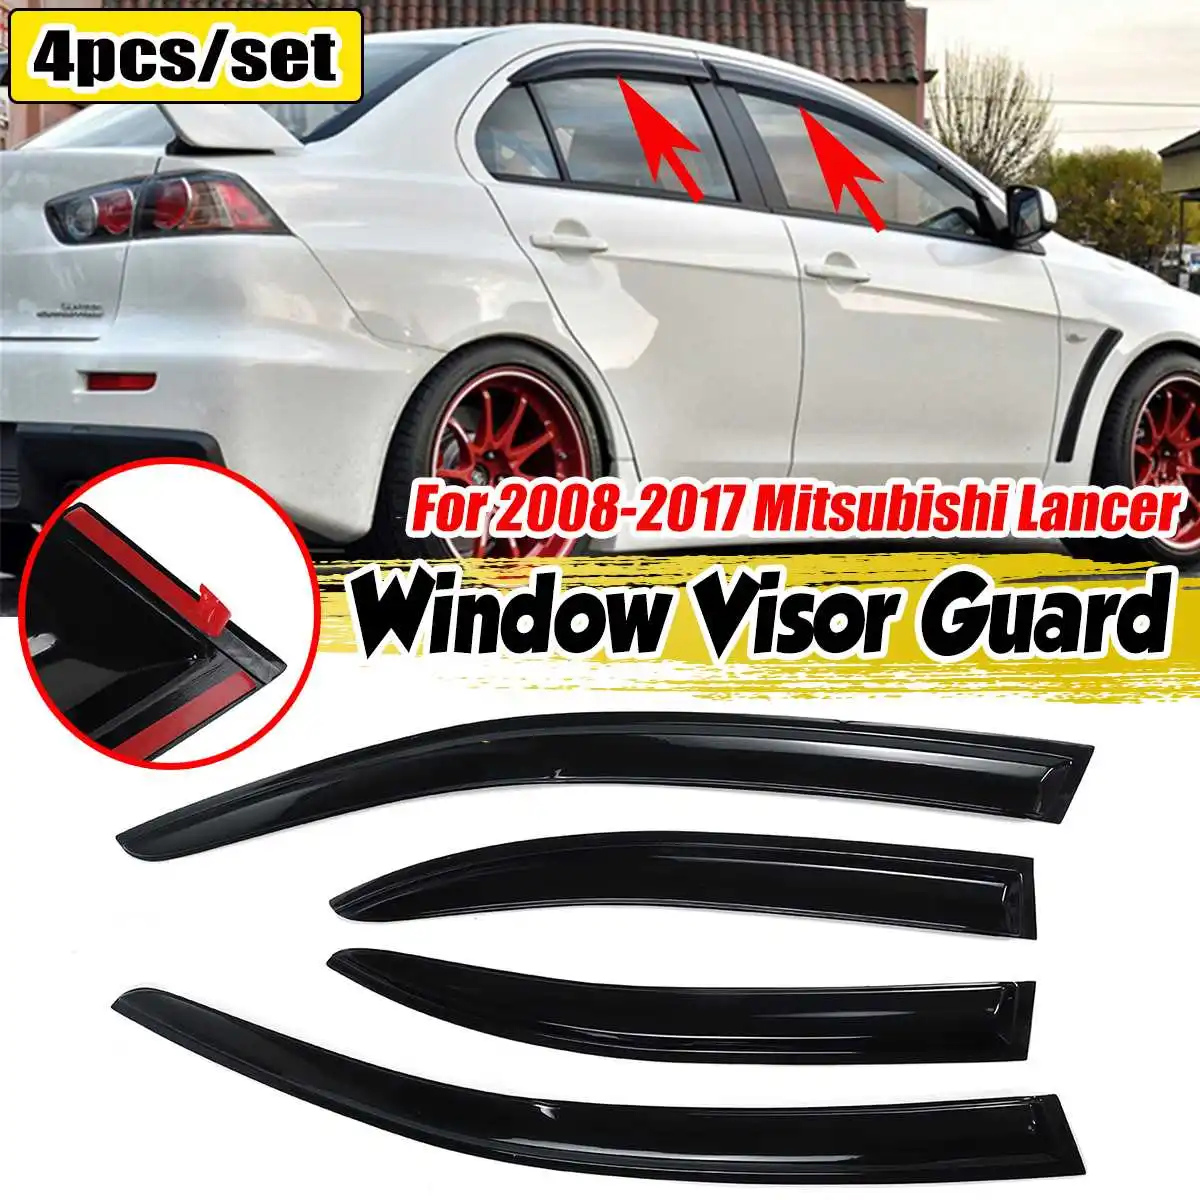 

4x Black Car Side Window Visor Guard Vent Cover Trim Awnings Shelters Protection Rain Guard For Mitsubishi Lancer 2008-2017